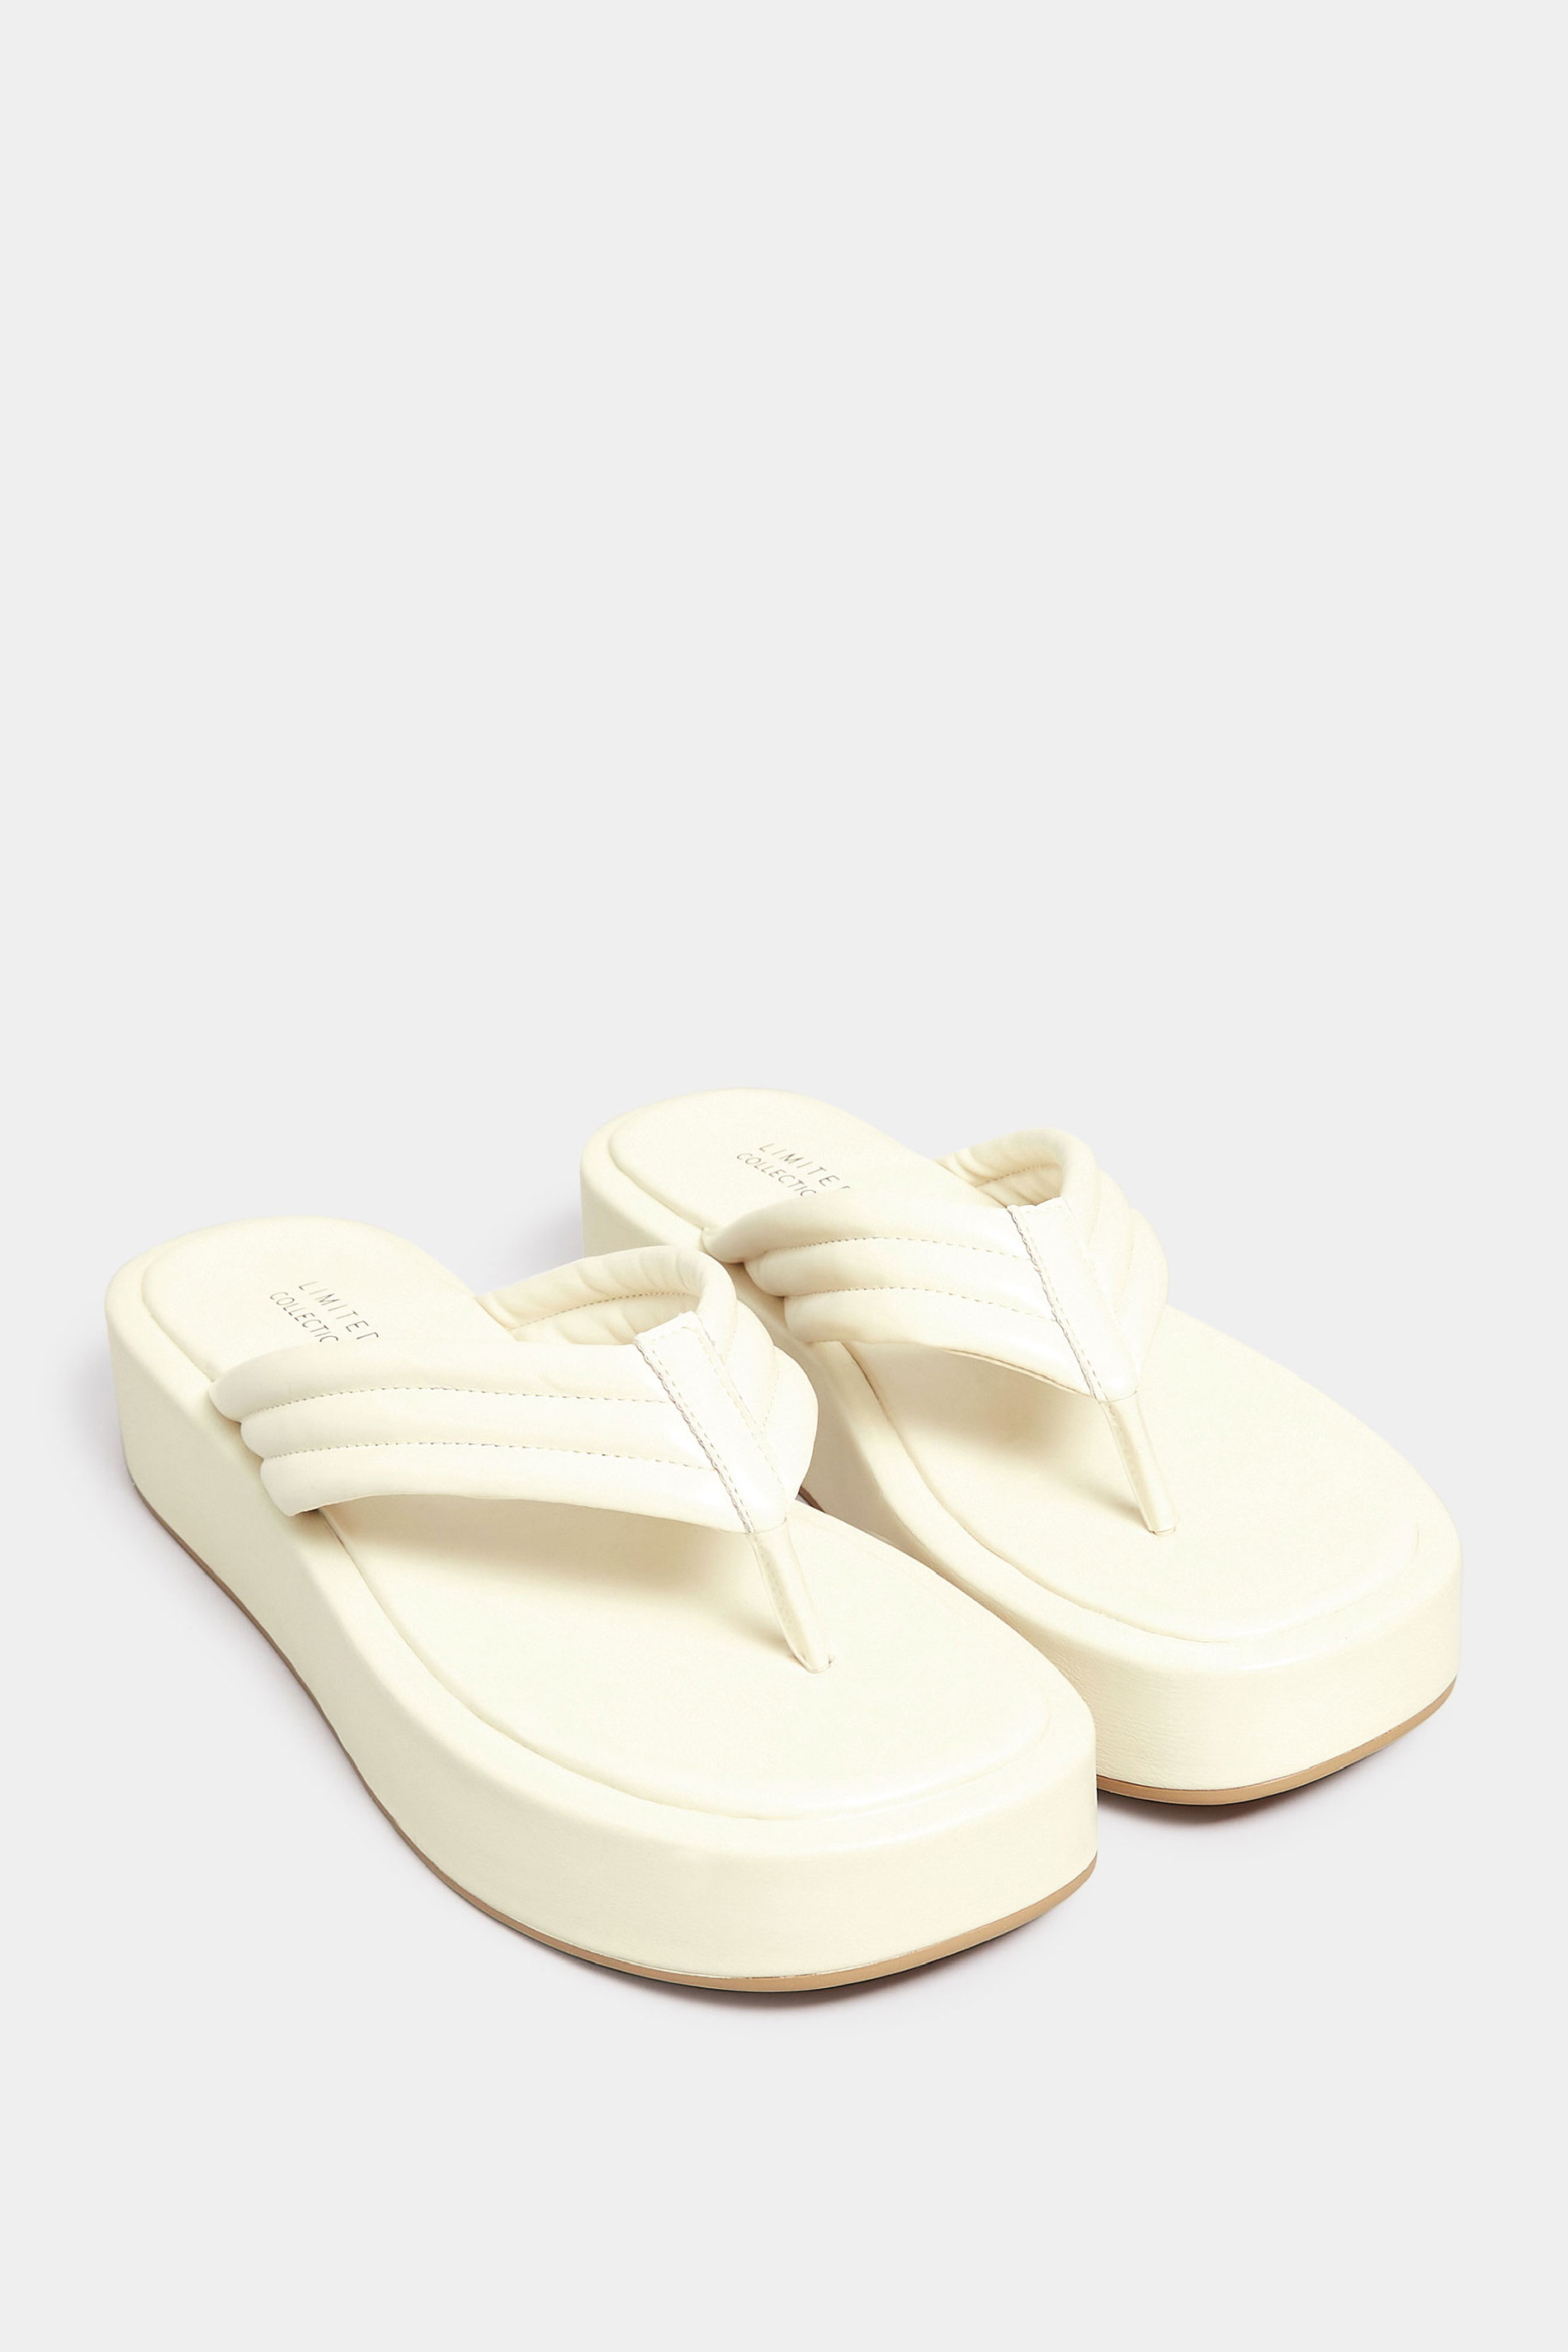 LIMITED COLLECTION White Flatform Flip Flops In Wide E Fit | Yours Clothing 2